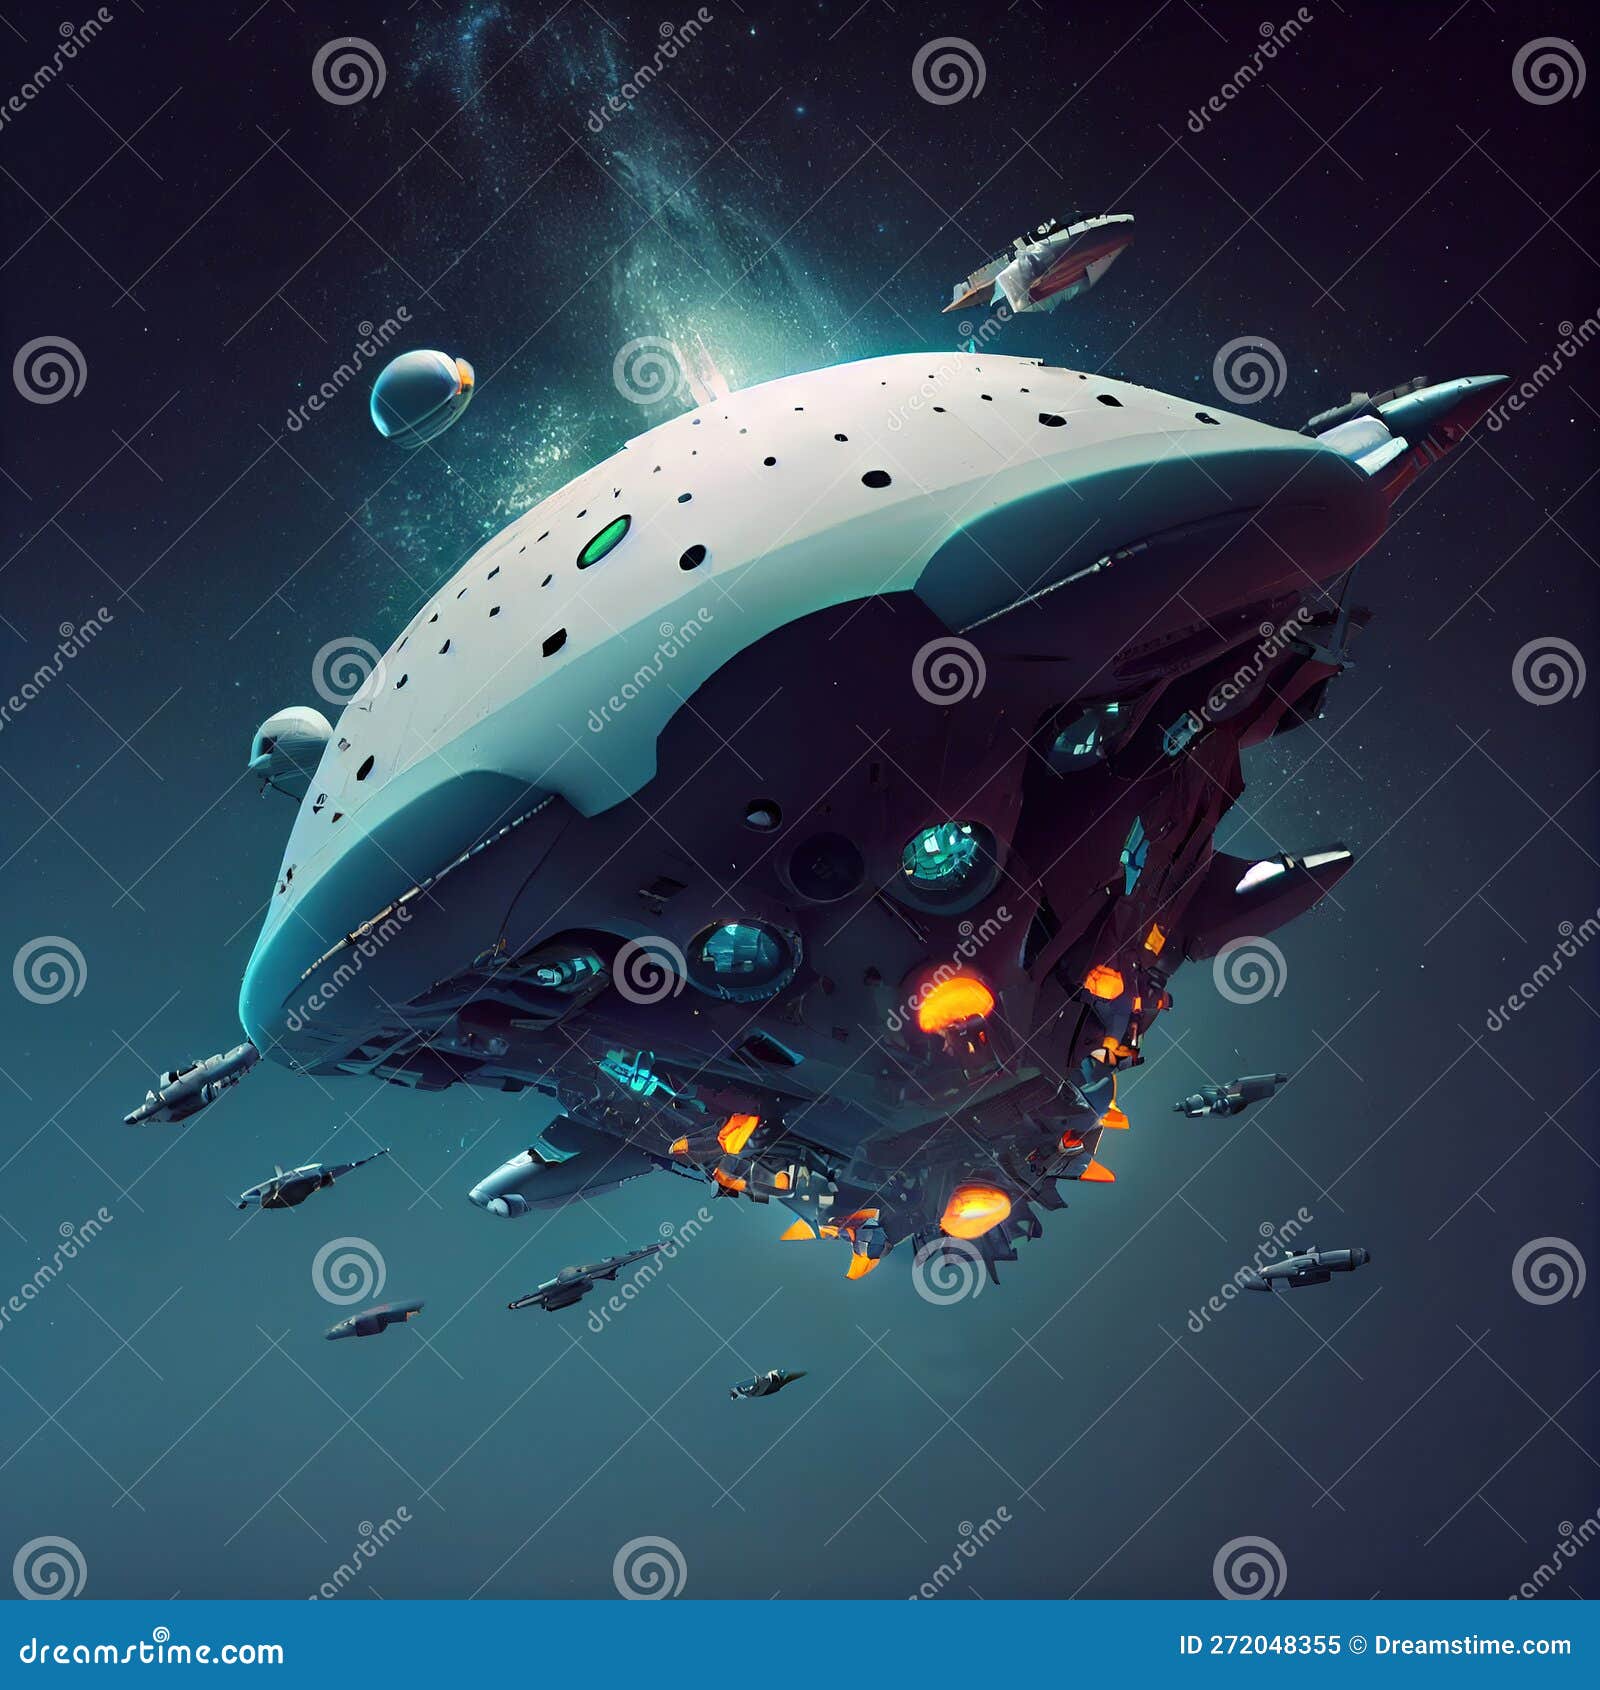 galactic command: a futuristic carrier spaceship and interceptors displaying in outer space